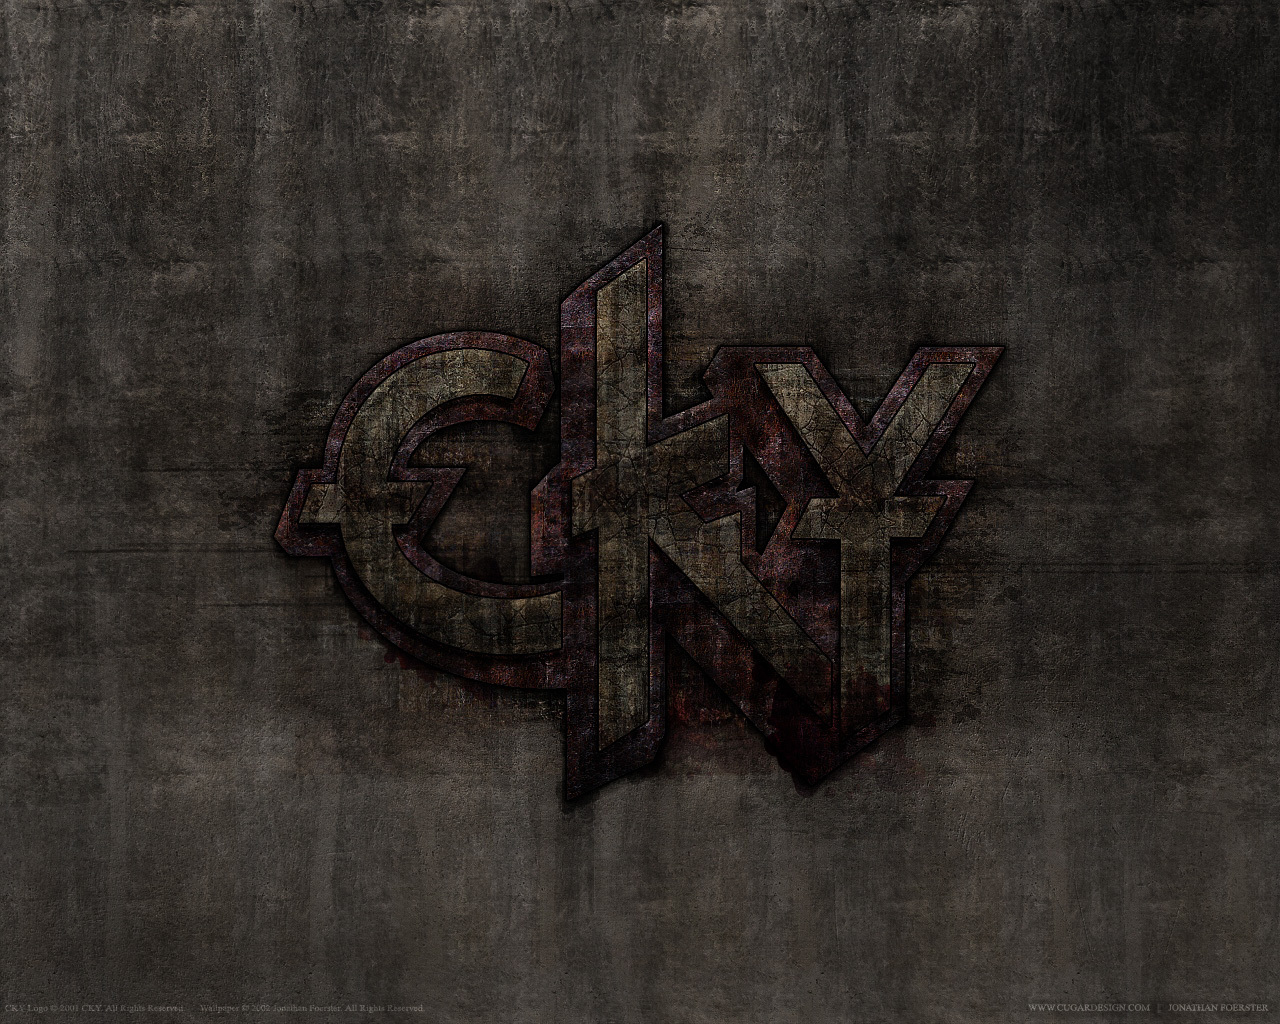 cKy images CKY HD wallpaper and background photos 15387179 1280x1024